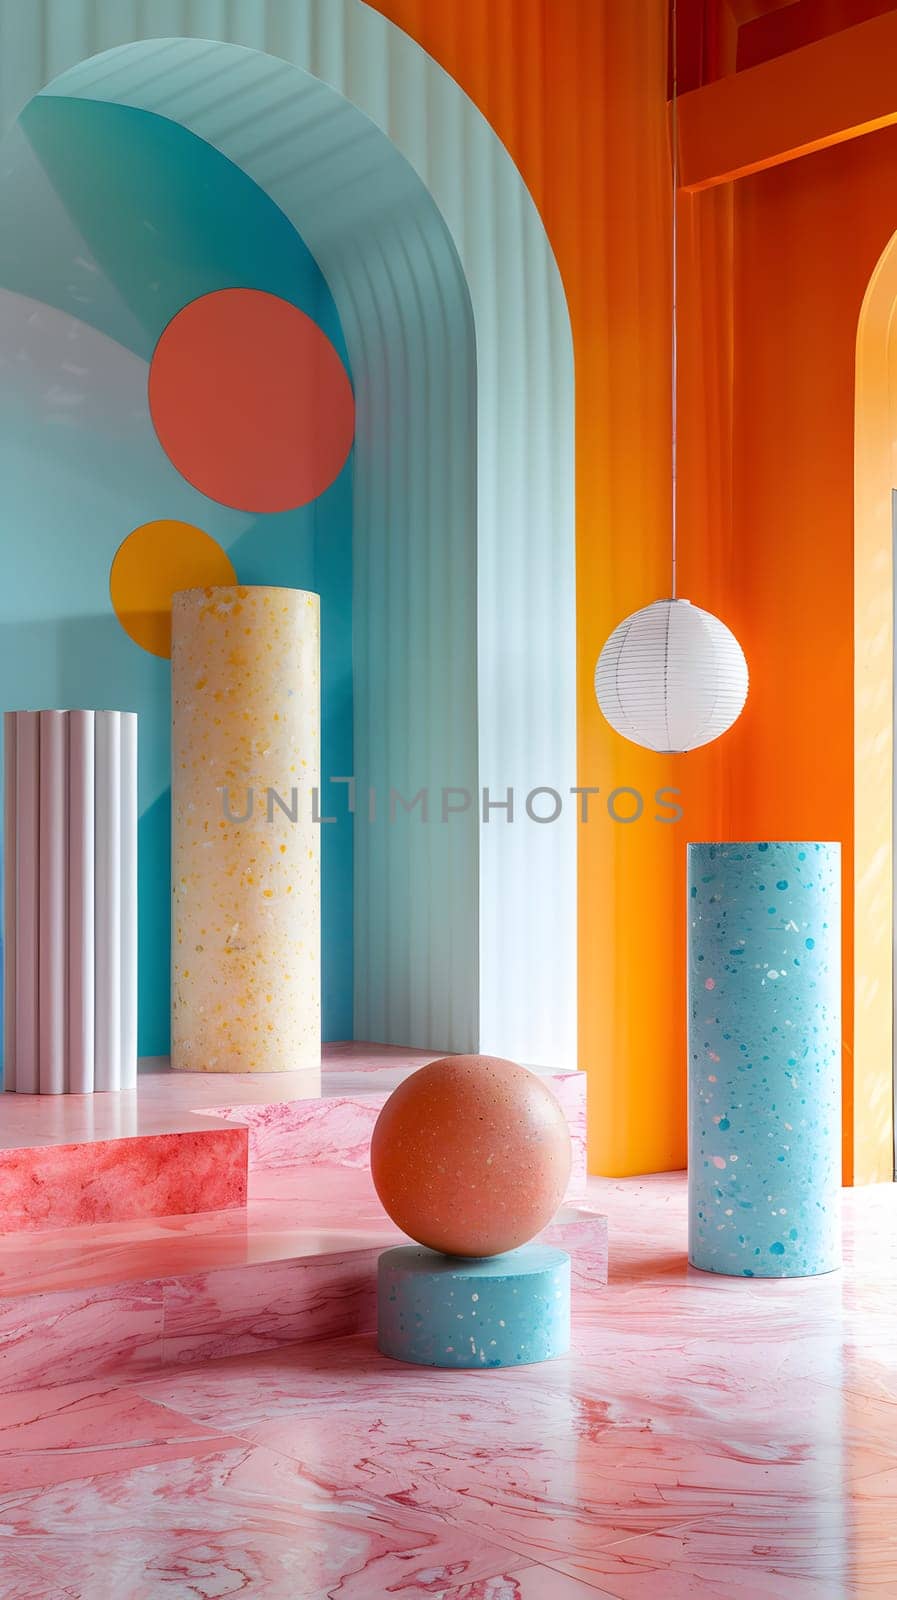 Vibrant room with colorful objects on walls and floor by Nadtochiy